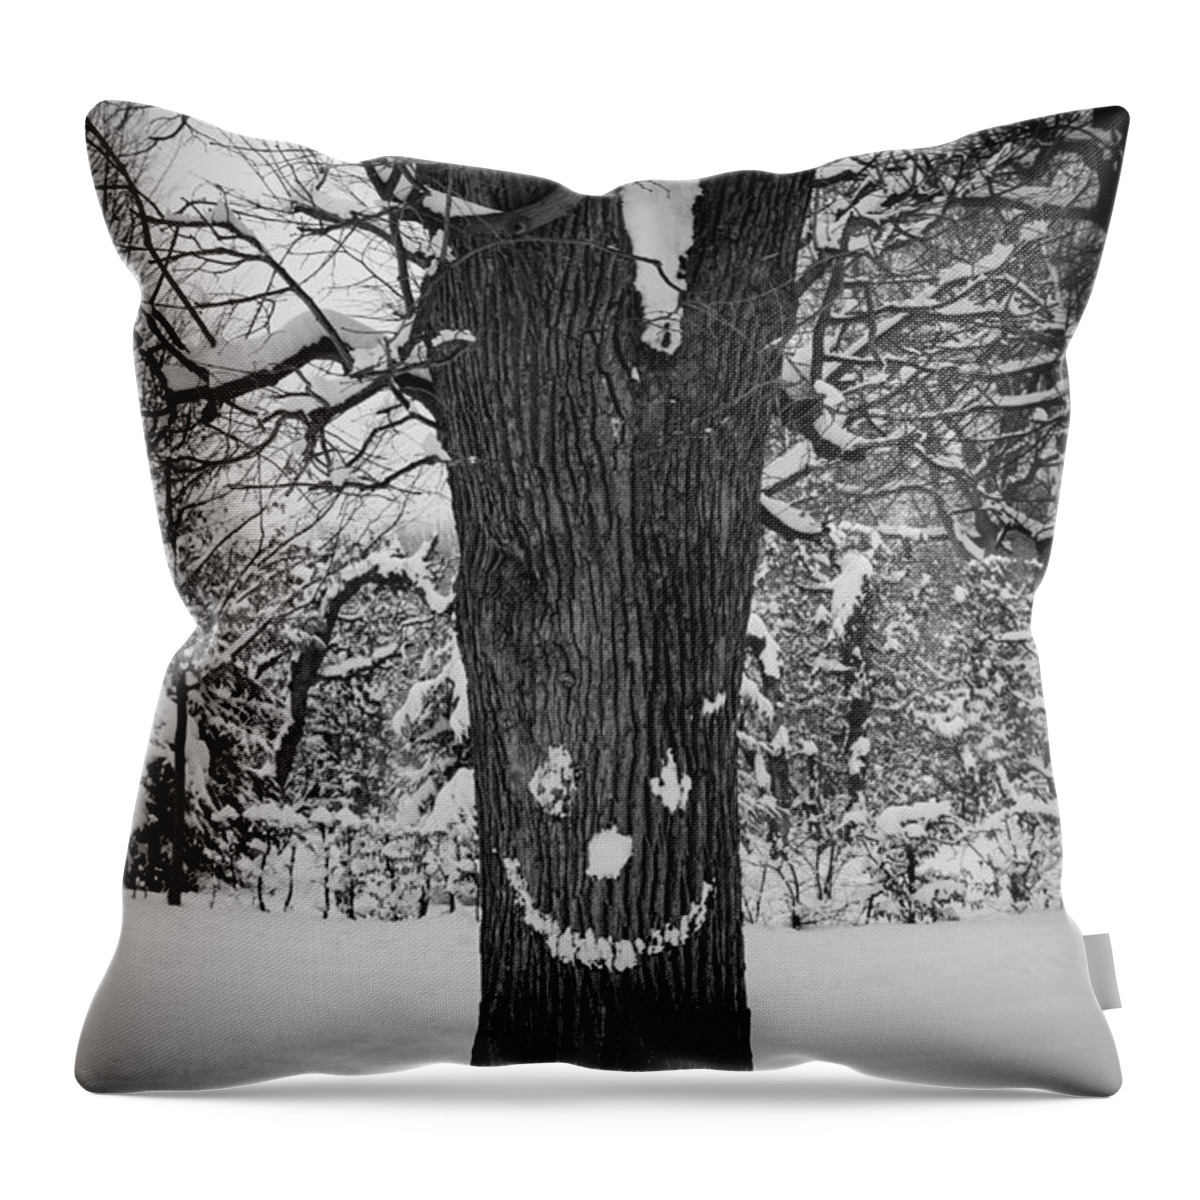 Winter Throw Pillow featuring the photograph Face Of The Winter by Andreas Berthold